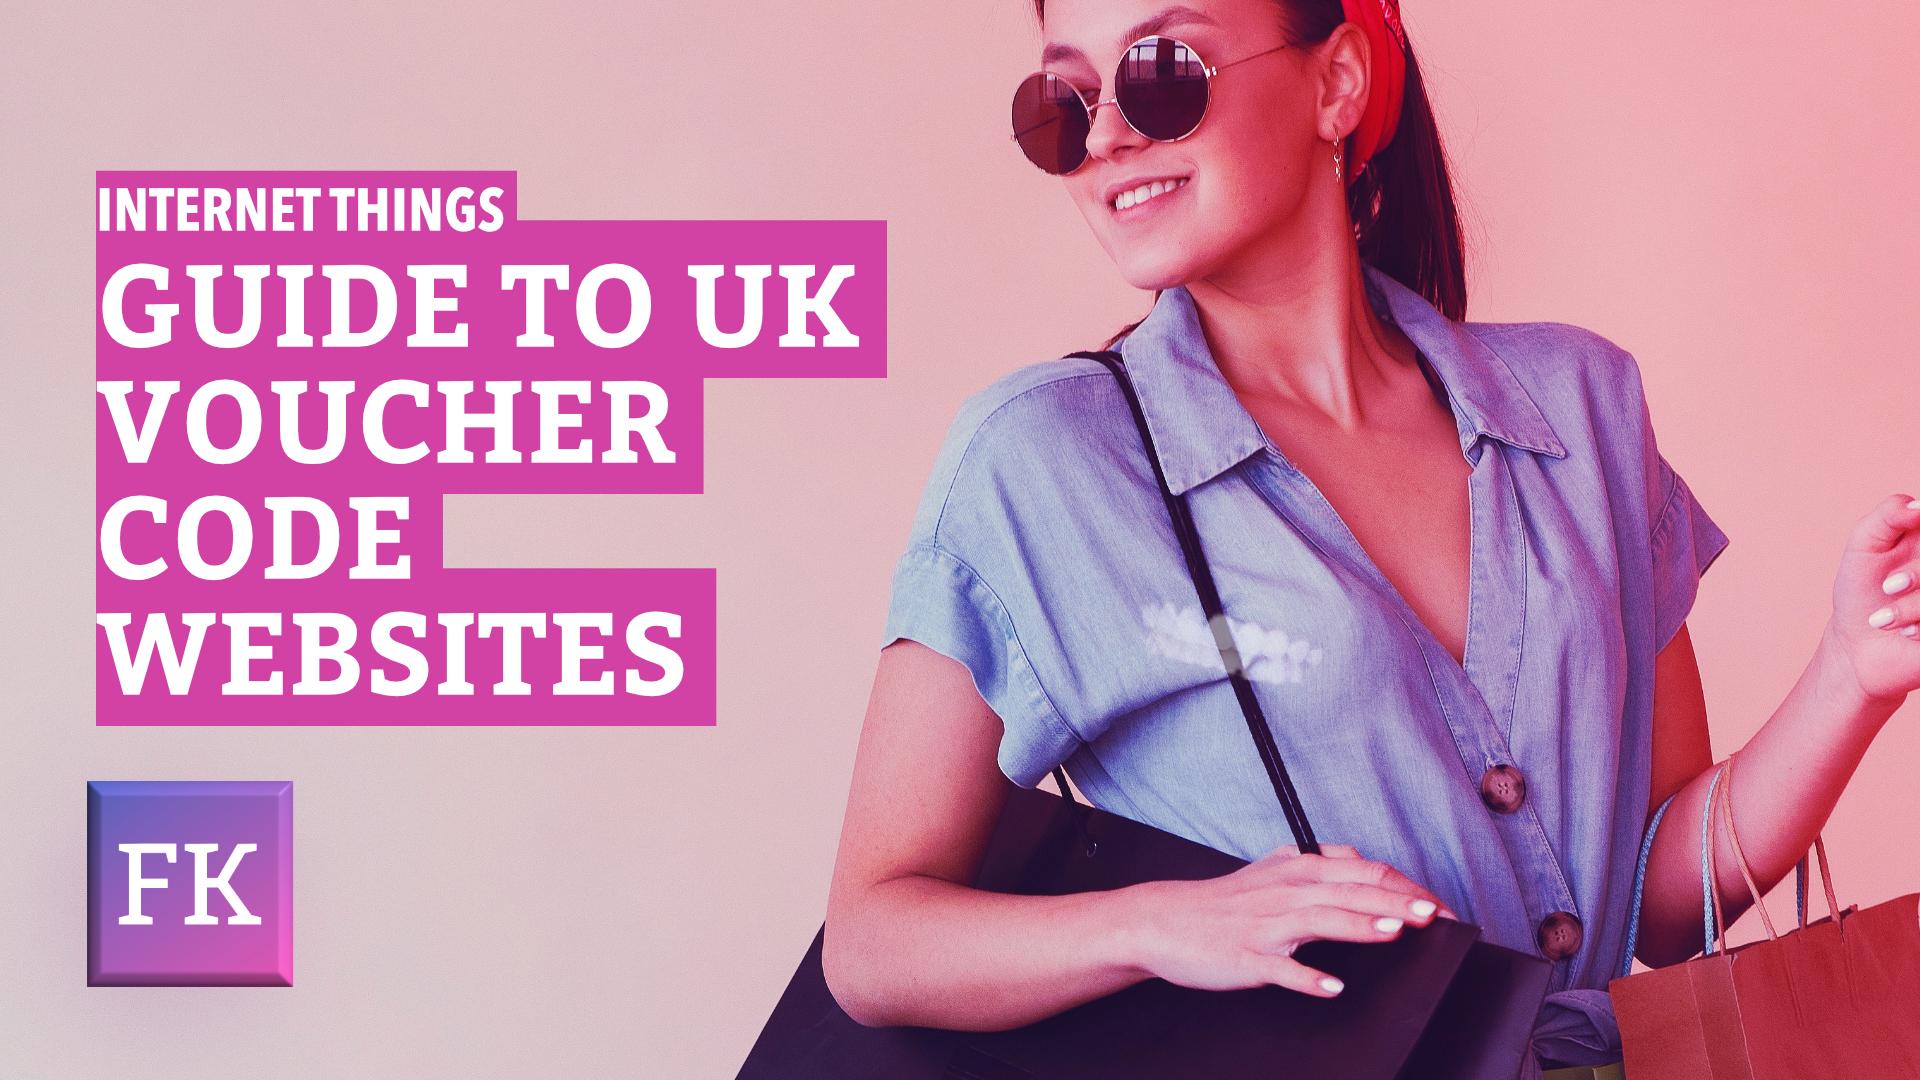 Fresh Kit's guide to UK voucher code websites, features a young lady smiling, with shopping bags from designer stores.